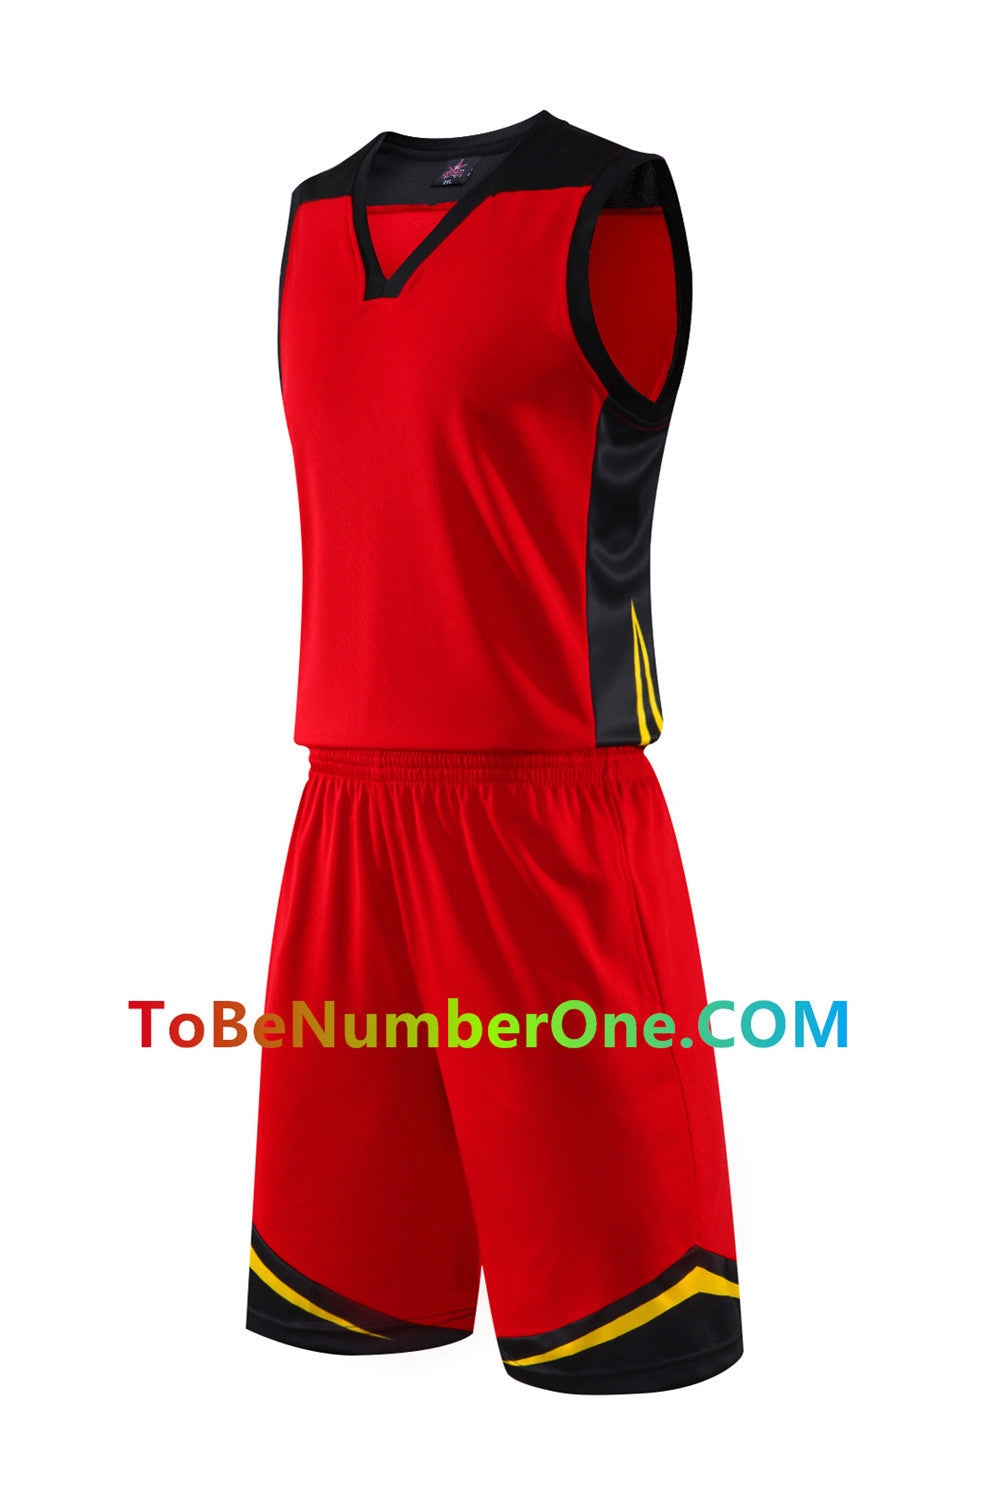 Customize instock High Quality Quick-drying basketball jerseys&shorts with pocket 213# print with team name , player and number.